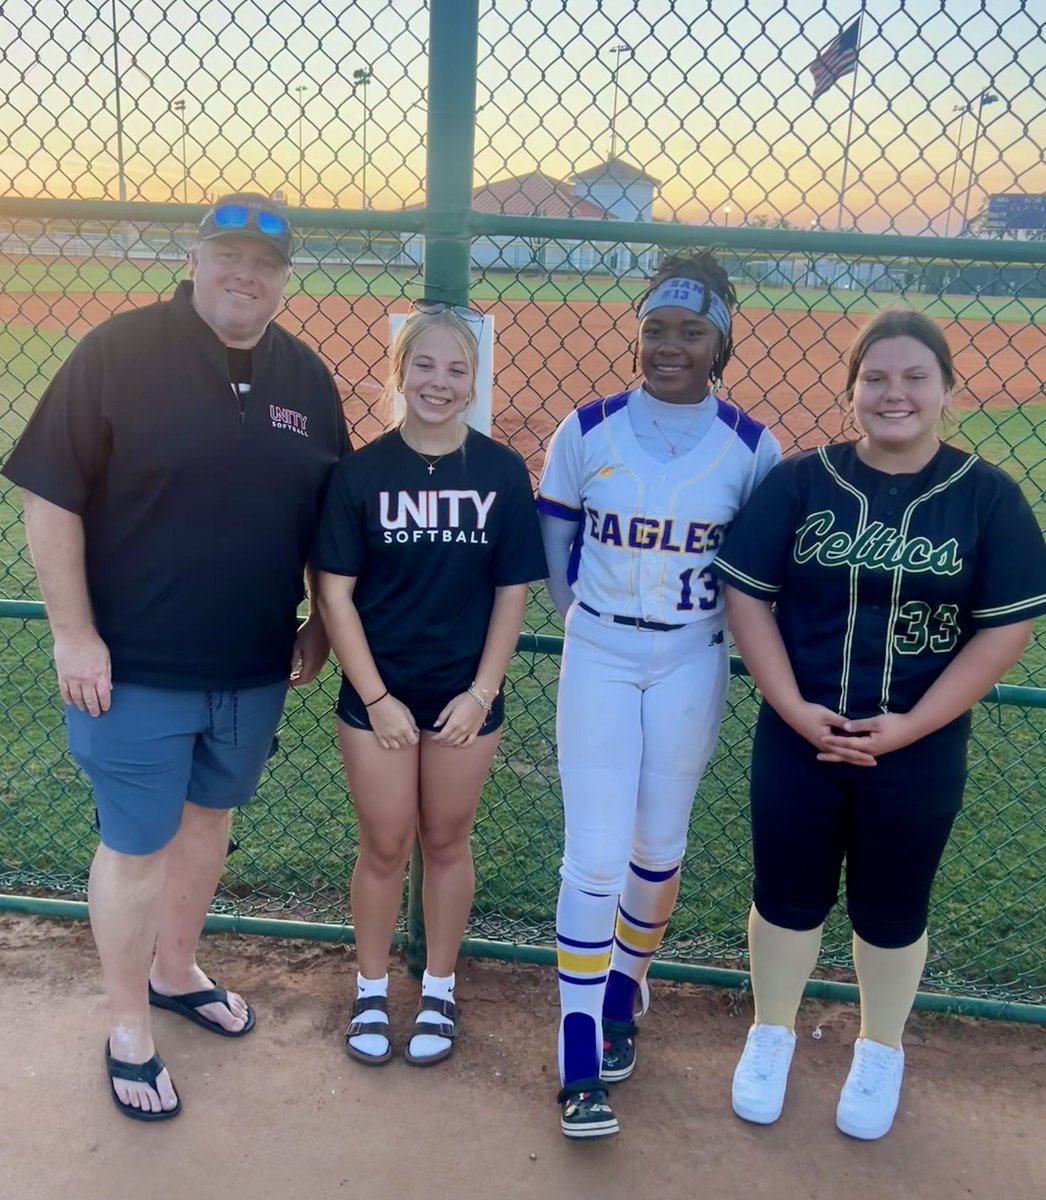 Was great seeing 2 of my @09Unity teammates @AdairAmsler2028 @la_breah and Coach @DaveAmsler tonight! Me and my team took a beat down to a solid team. I closed the game but had a rough time in the circle facing some great hitters. I batted .500 & not satisfied, just ready to…